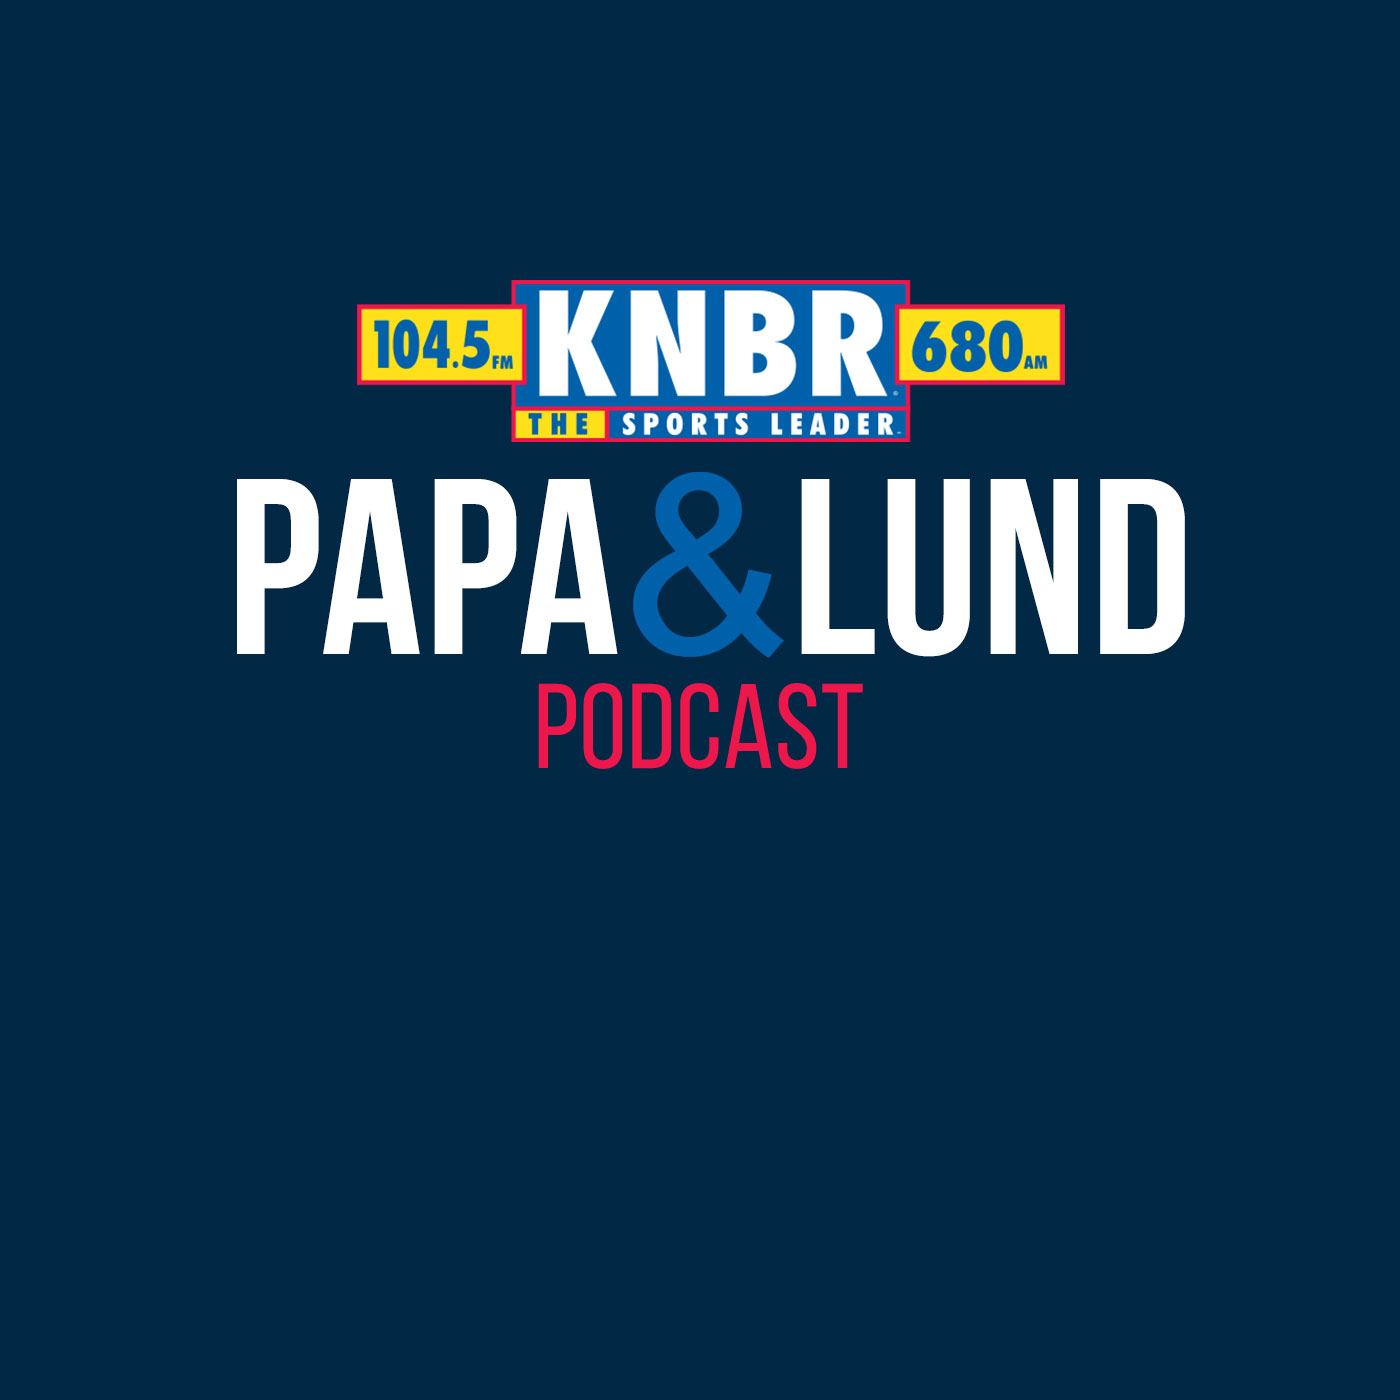 6-23 Al McCoy joins Papa & Lund to discuss the Warriors trade for Chris Paul and what he can add to the team at this stage in his career